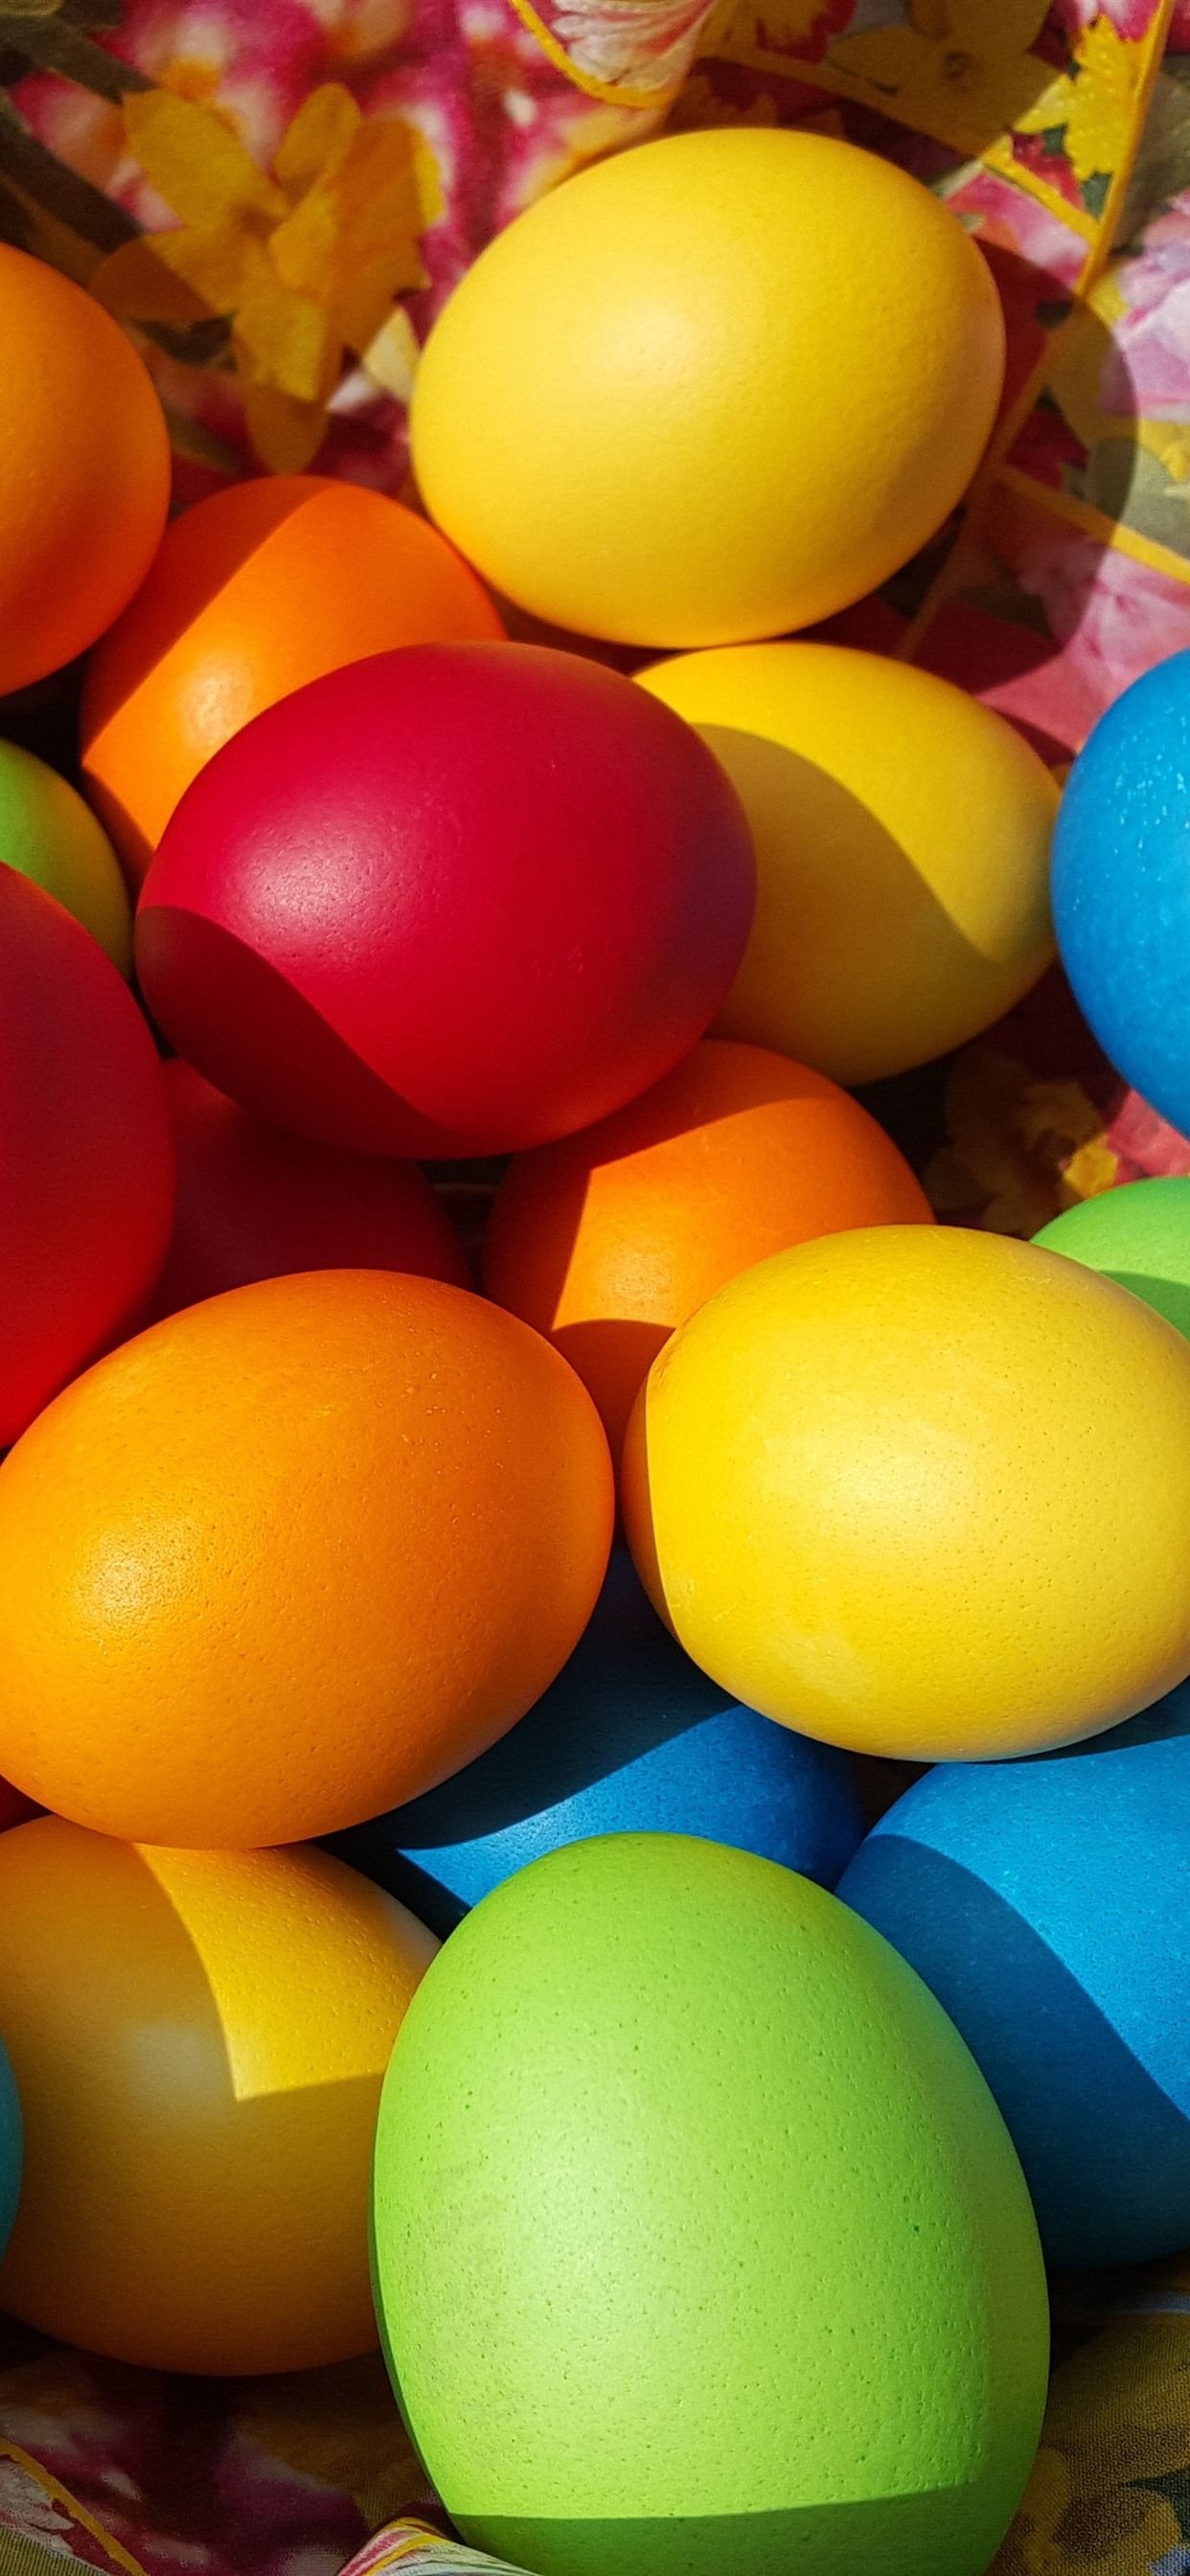 Colorful Easter Eggs, Cloth, Colors 1242x2688 IPhone 11 Pro XS Max